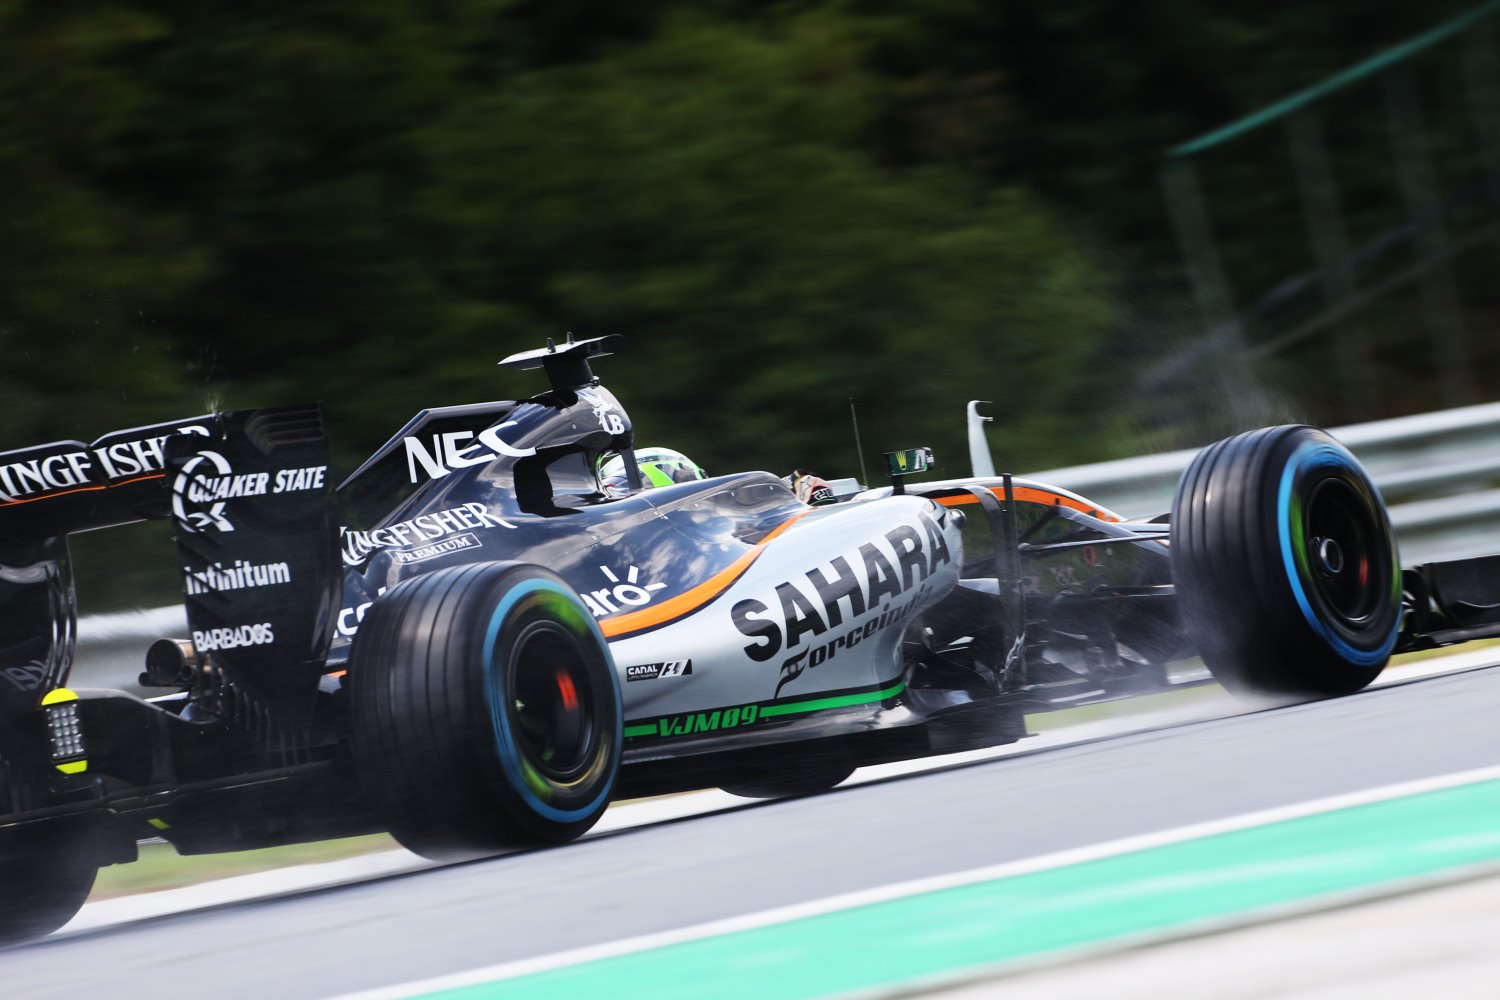 Force India on a charge